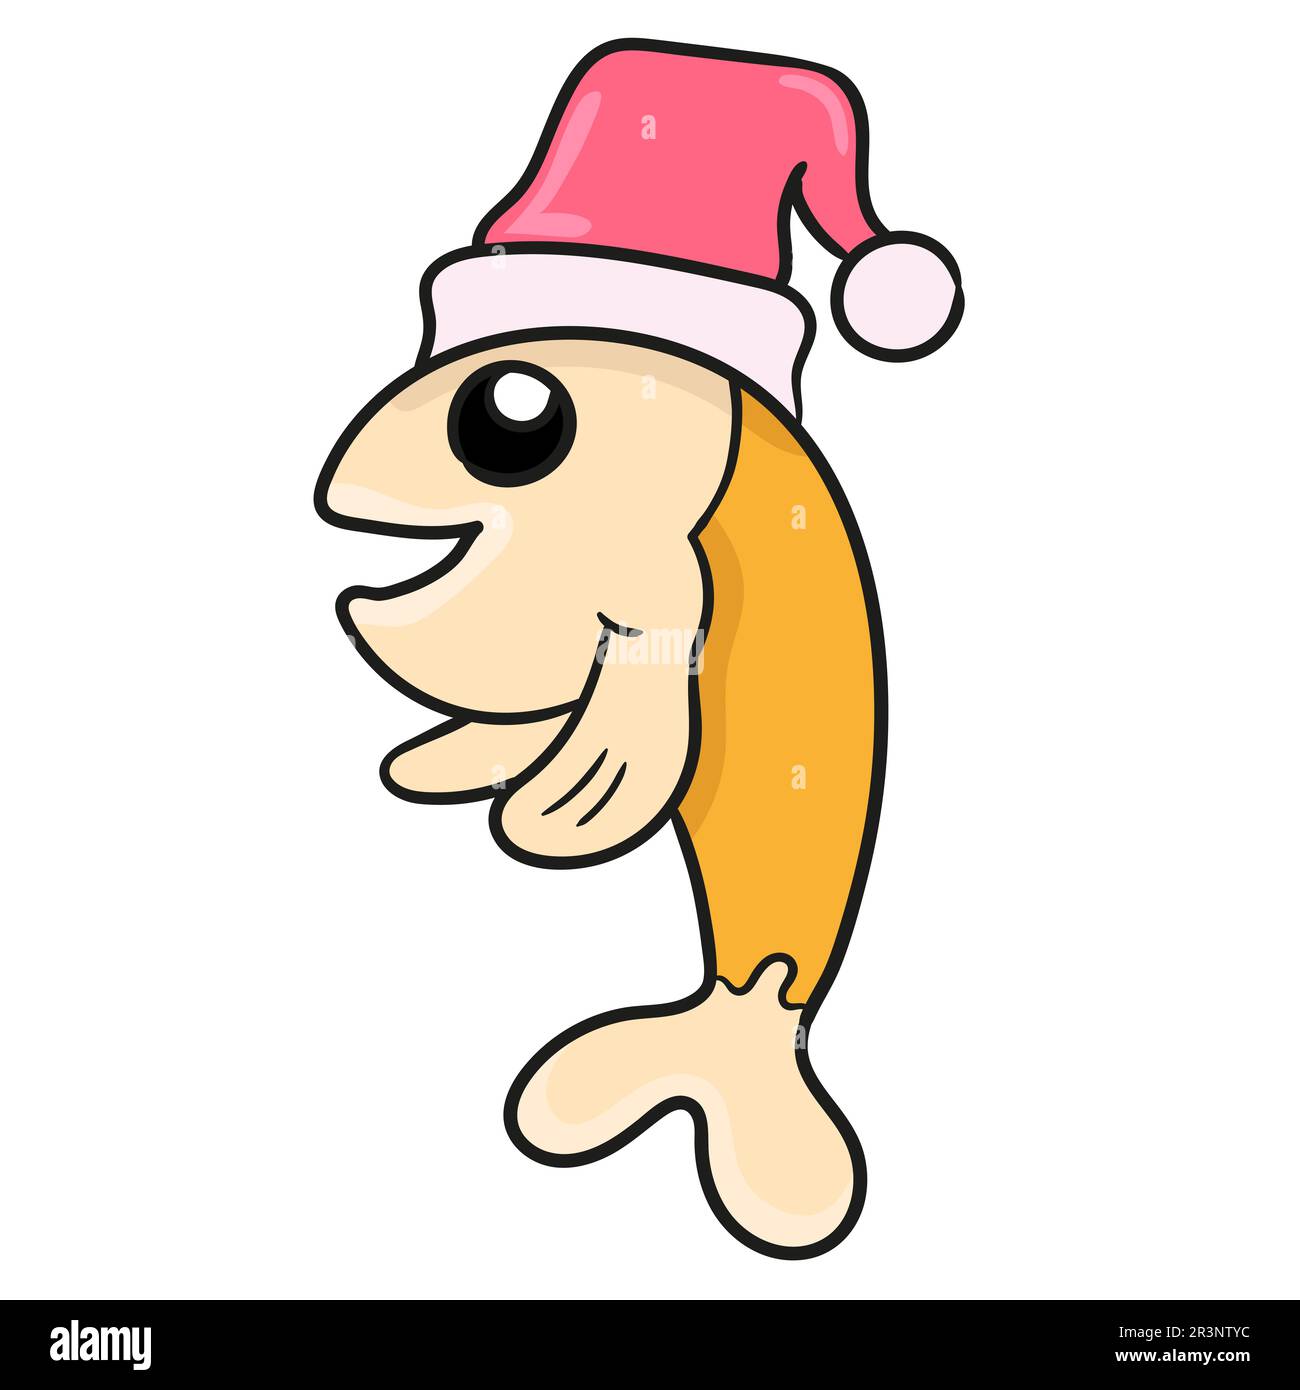 Gold fish with a santa claus hat. doodle icon image Stock Photo